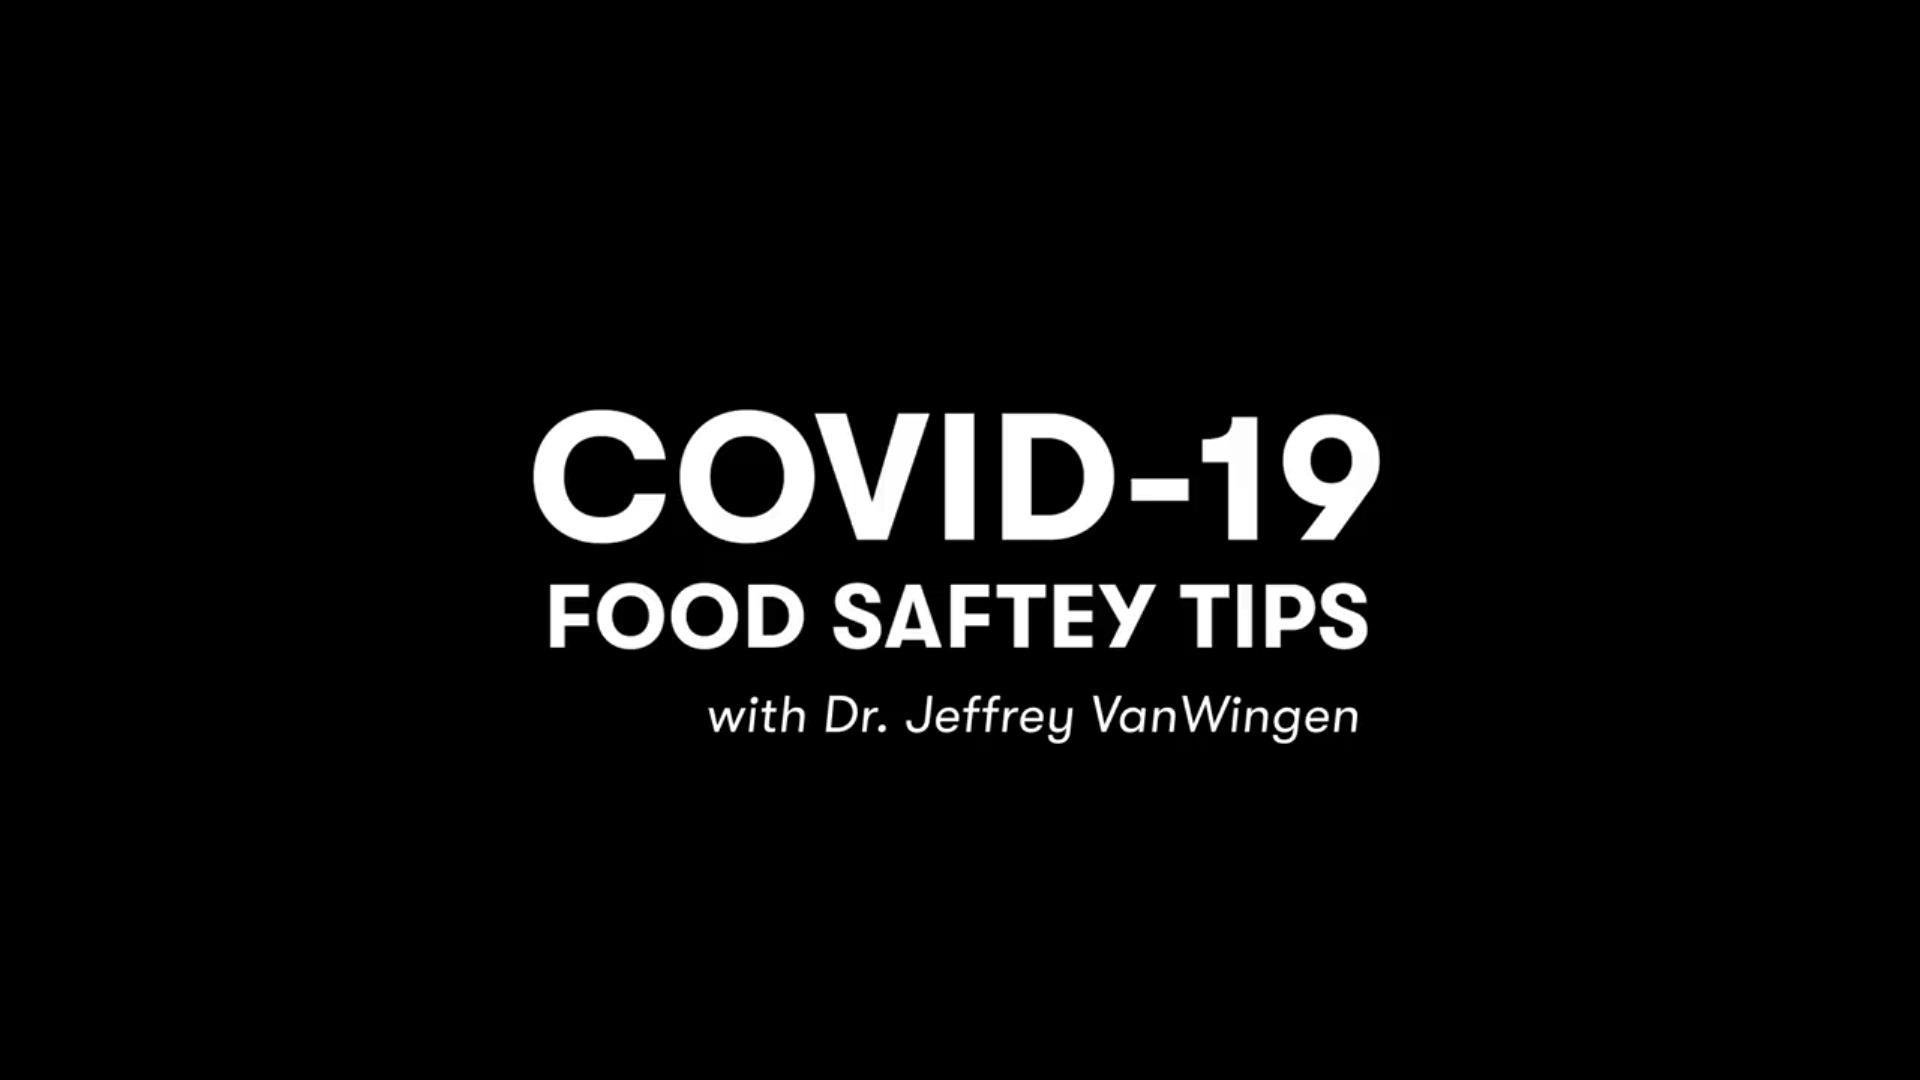 How to shop for food & clean safely COVID 19